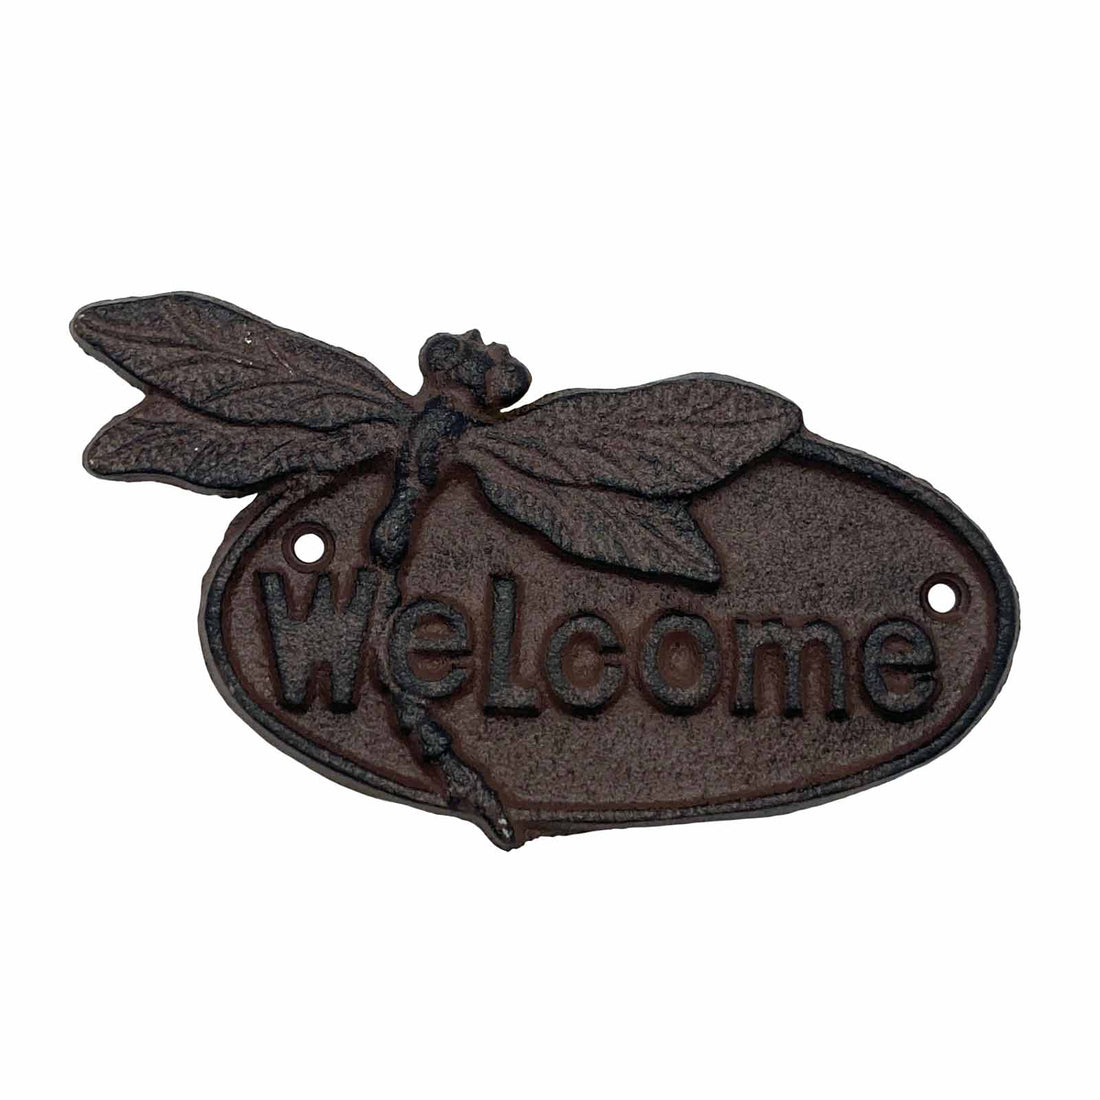 Mr Gecko Cast Iron Dragonfly Welcome Sign